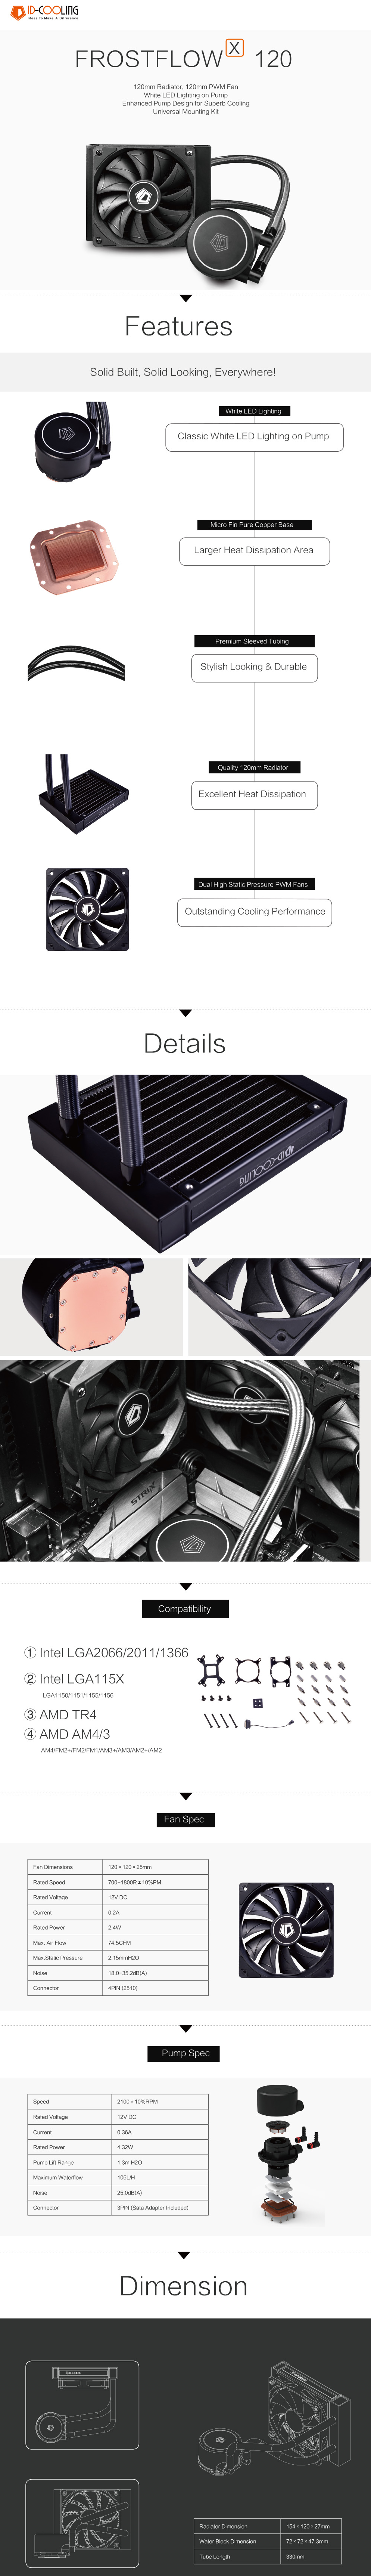 screencapture-idcooling-Product-detail-id-147-name-FROSTFLOW-X-120-2021-07-26-00_44_14 (1).png